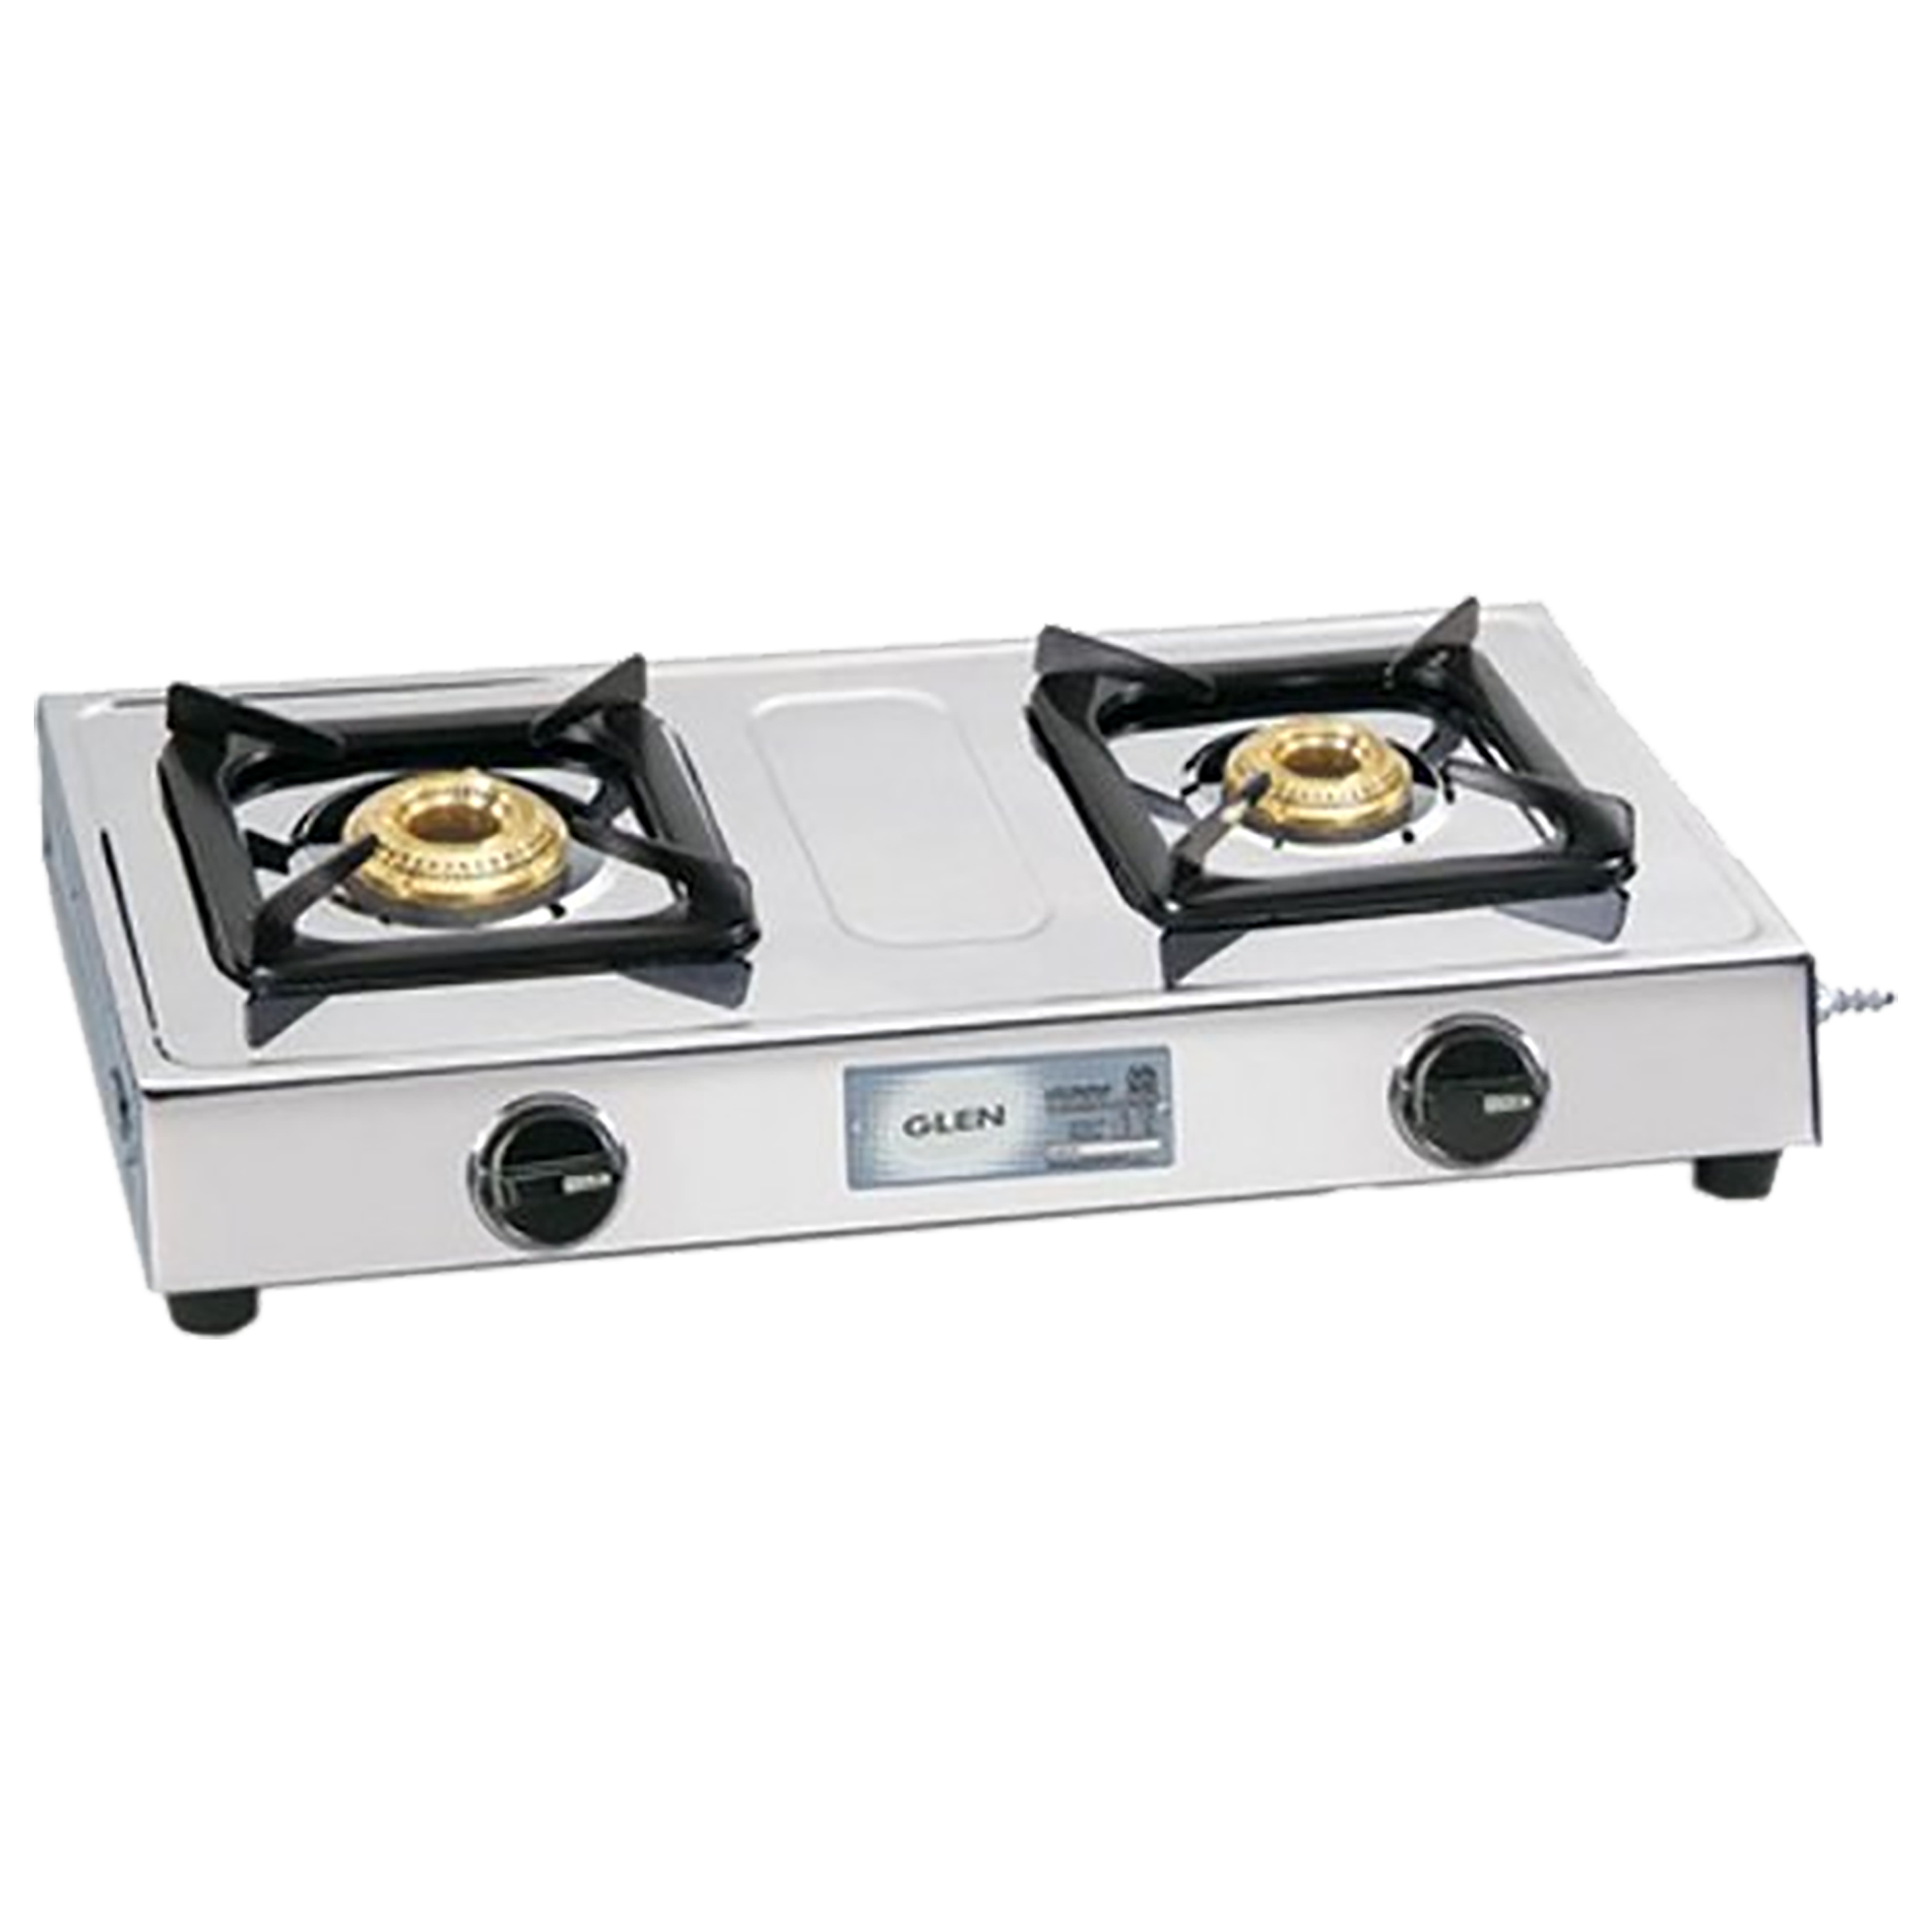 Glen CT1020SSBBAI 2 Burner Stainless Steel Gas Stove (MS Pan Supports, Silver)_1